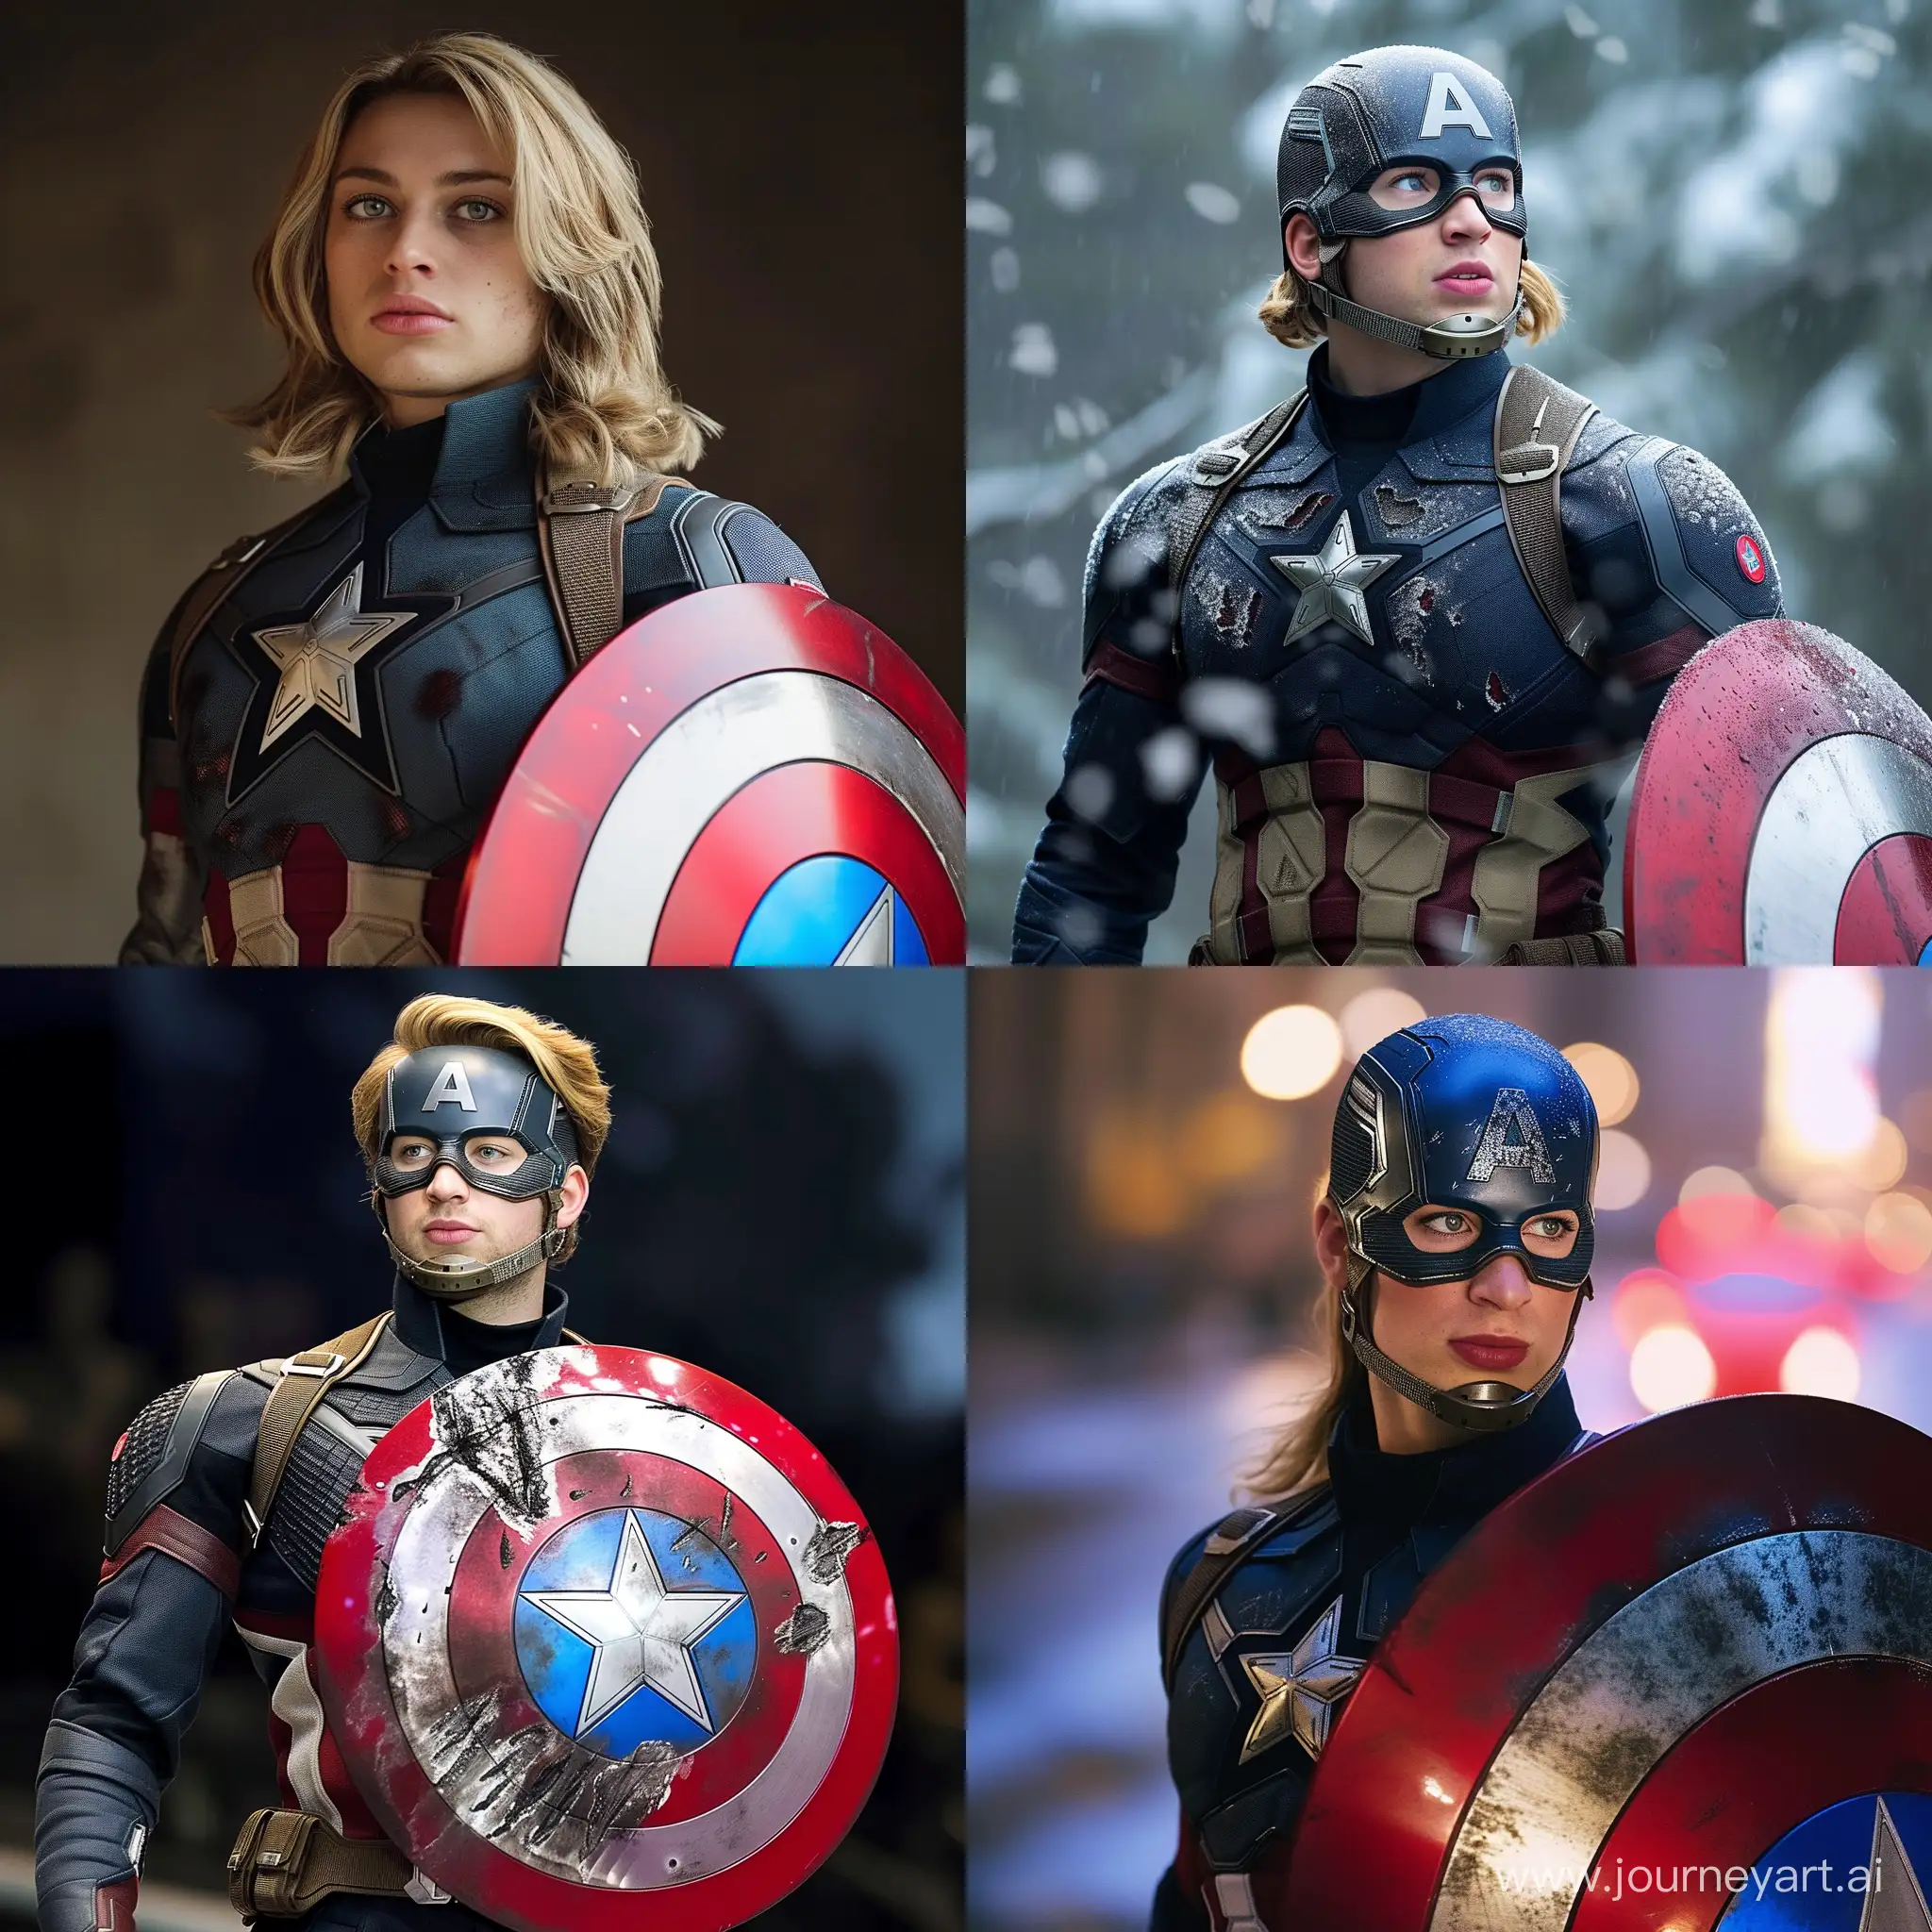 Miley-Cyrus-Portrays-Captain-America-in-HBO-Series-for-Netflix